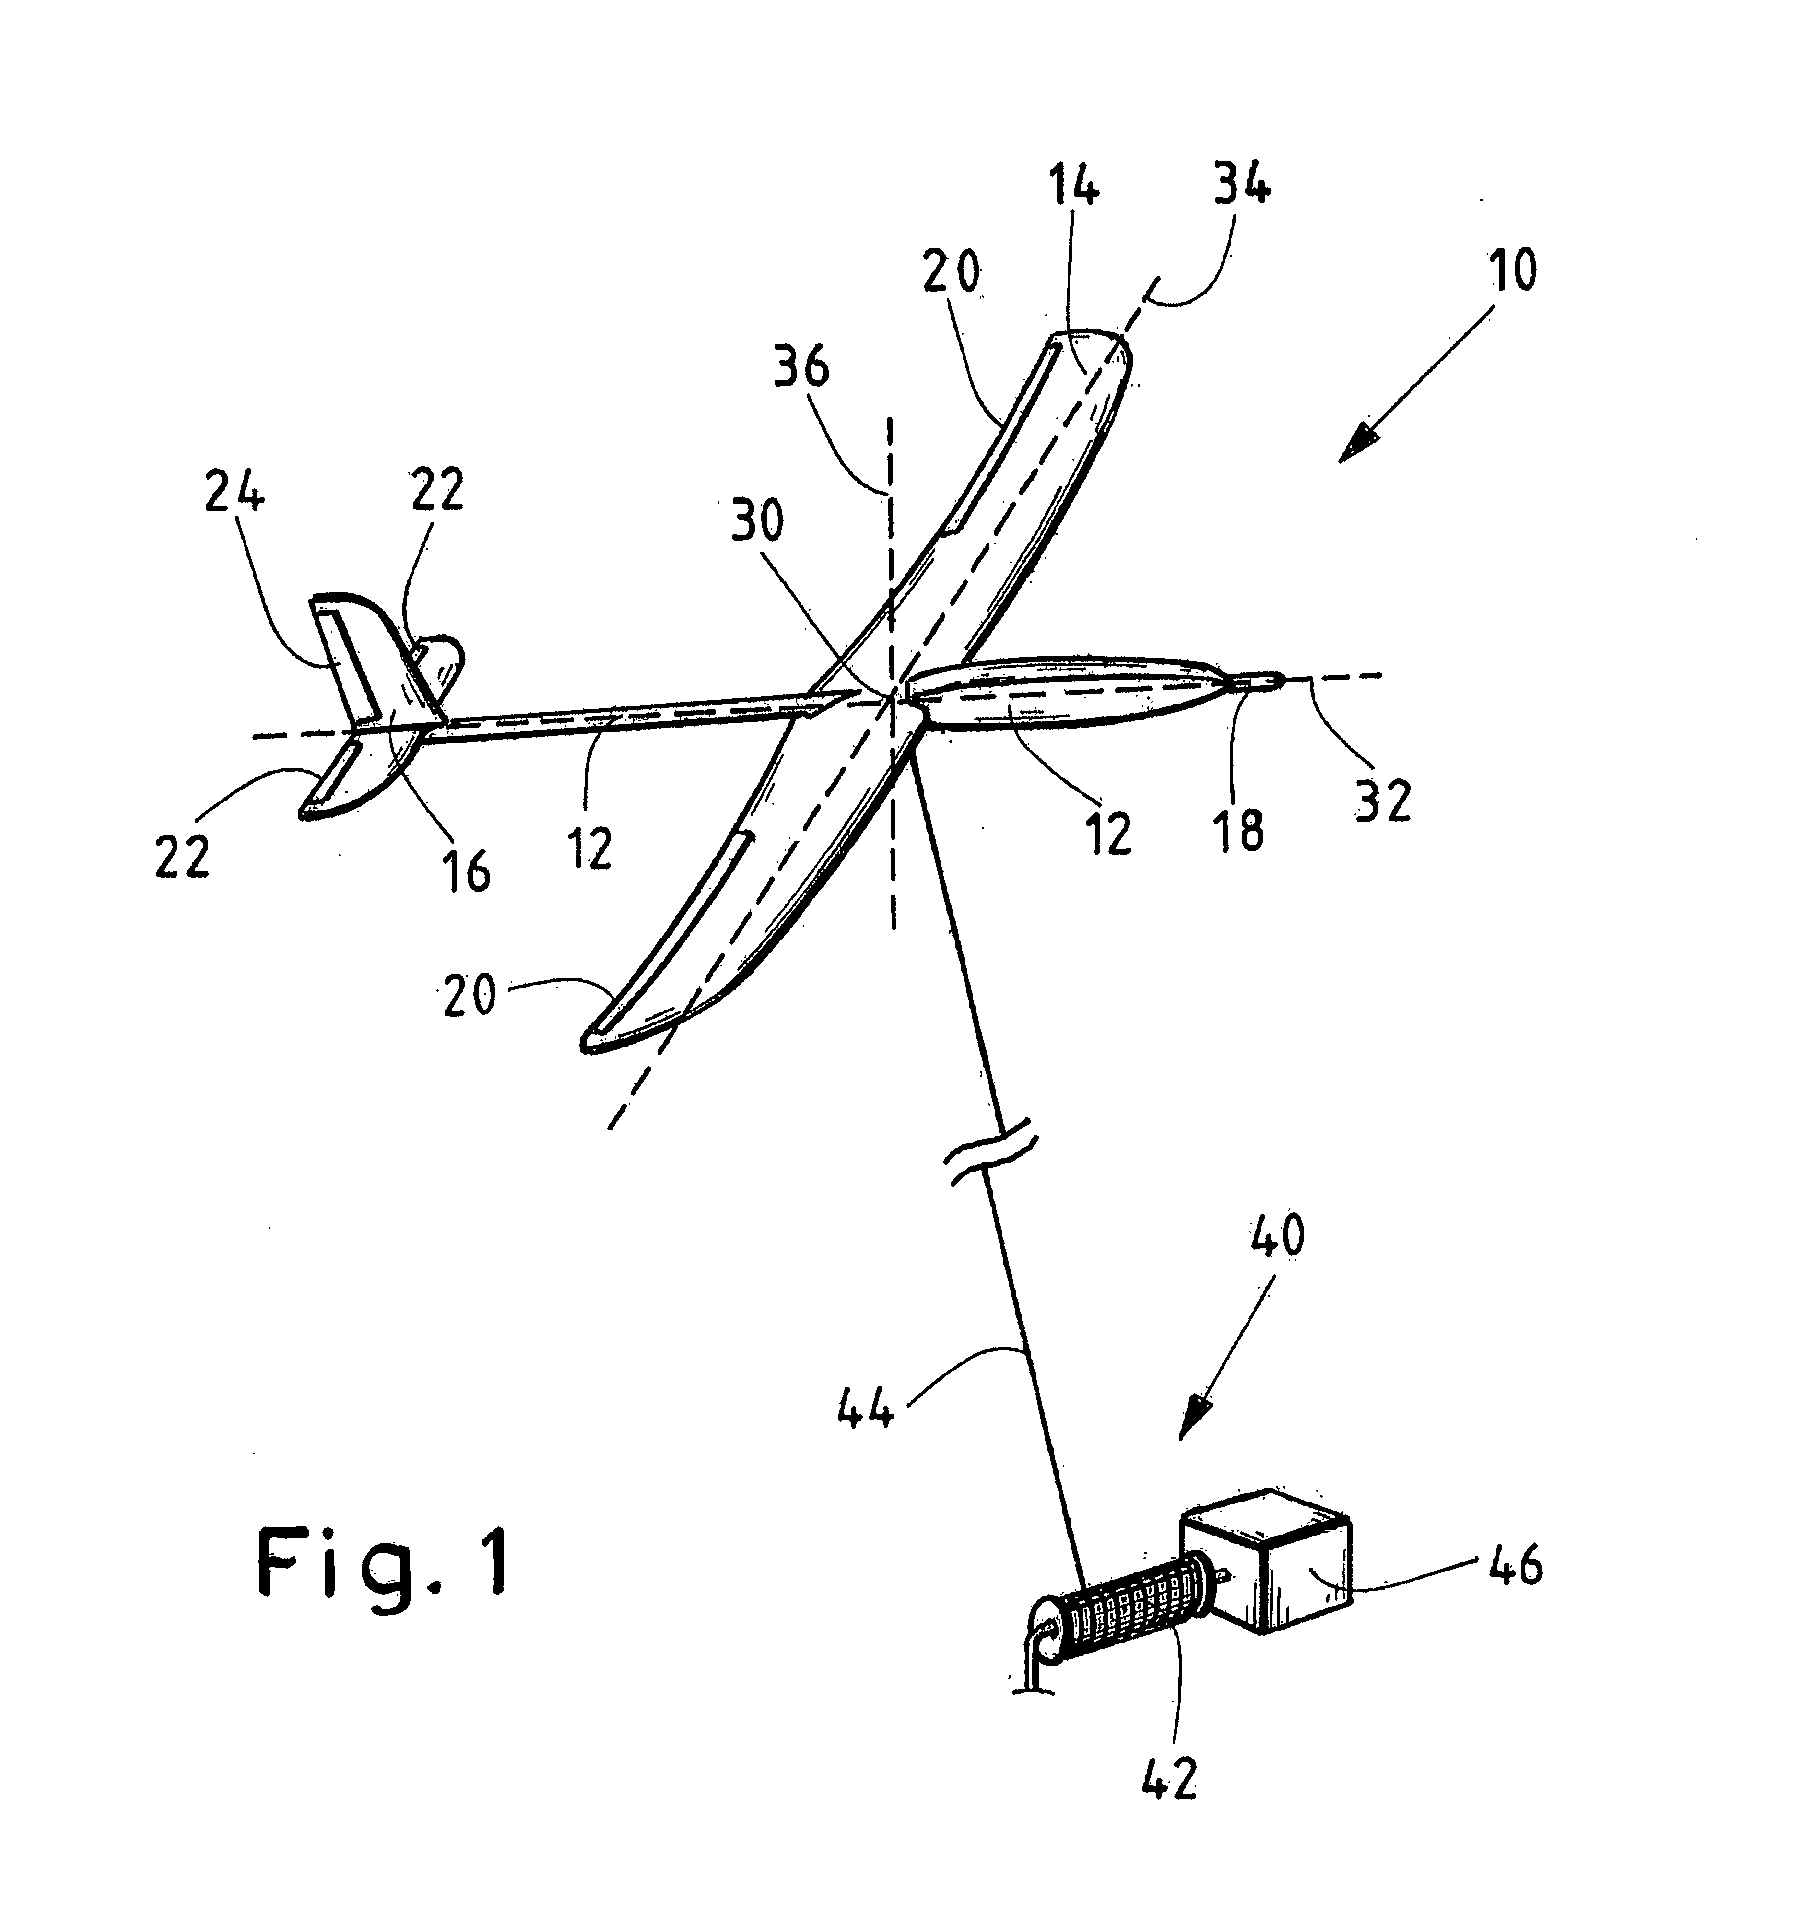 System and method for airborne wind energy production